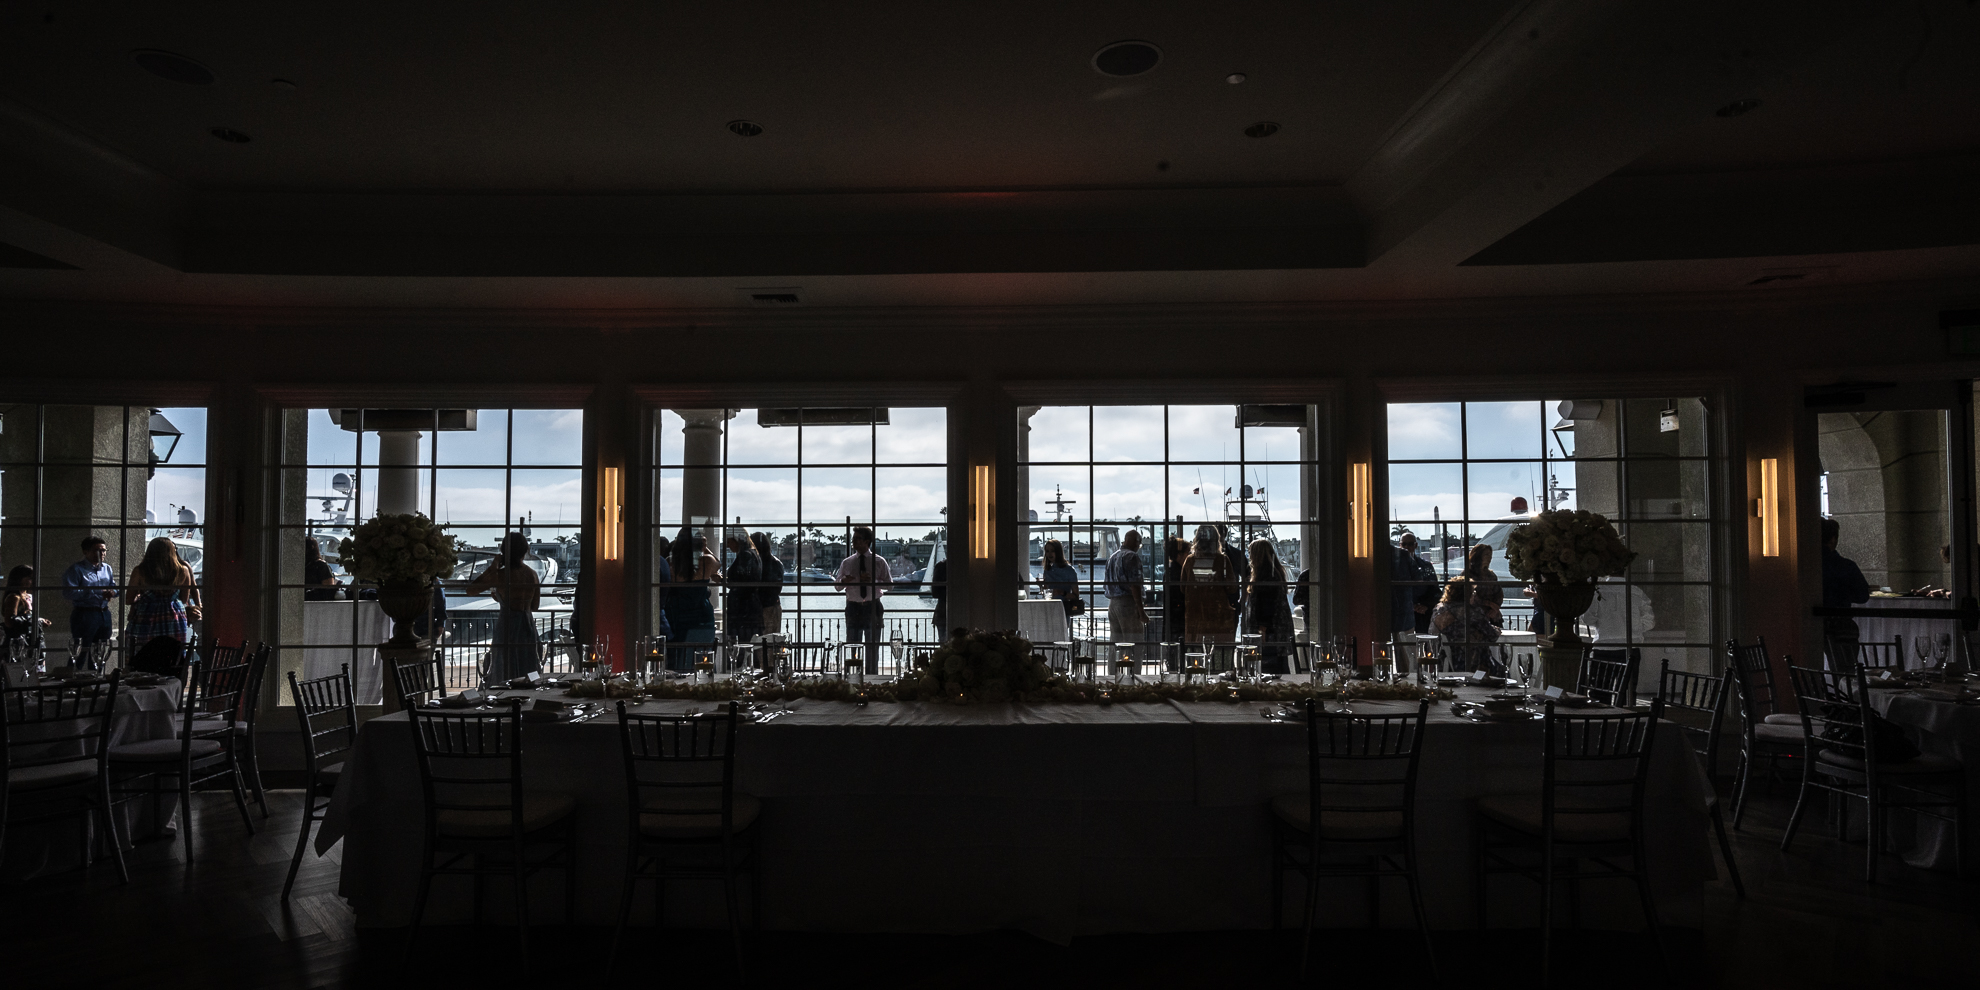 Thomas Kim's Los Angeles wedding reception with large windows overlooking the water.